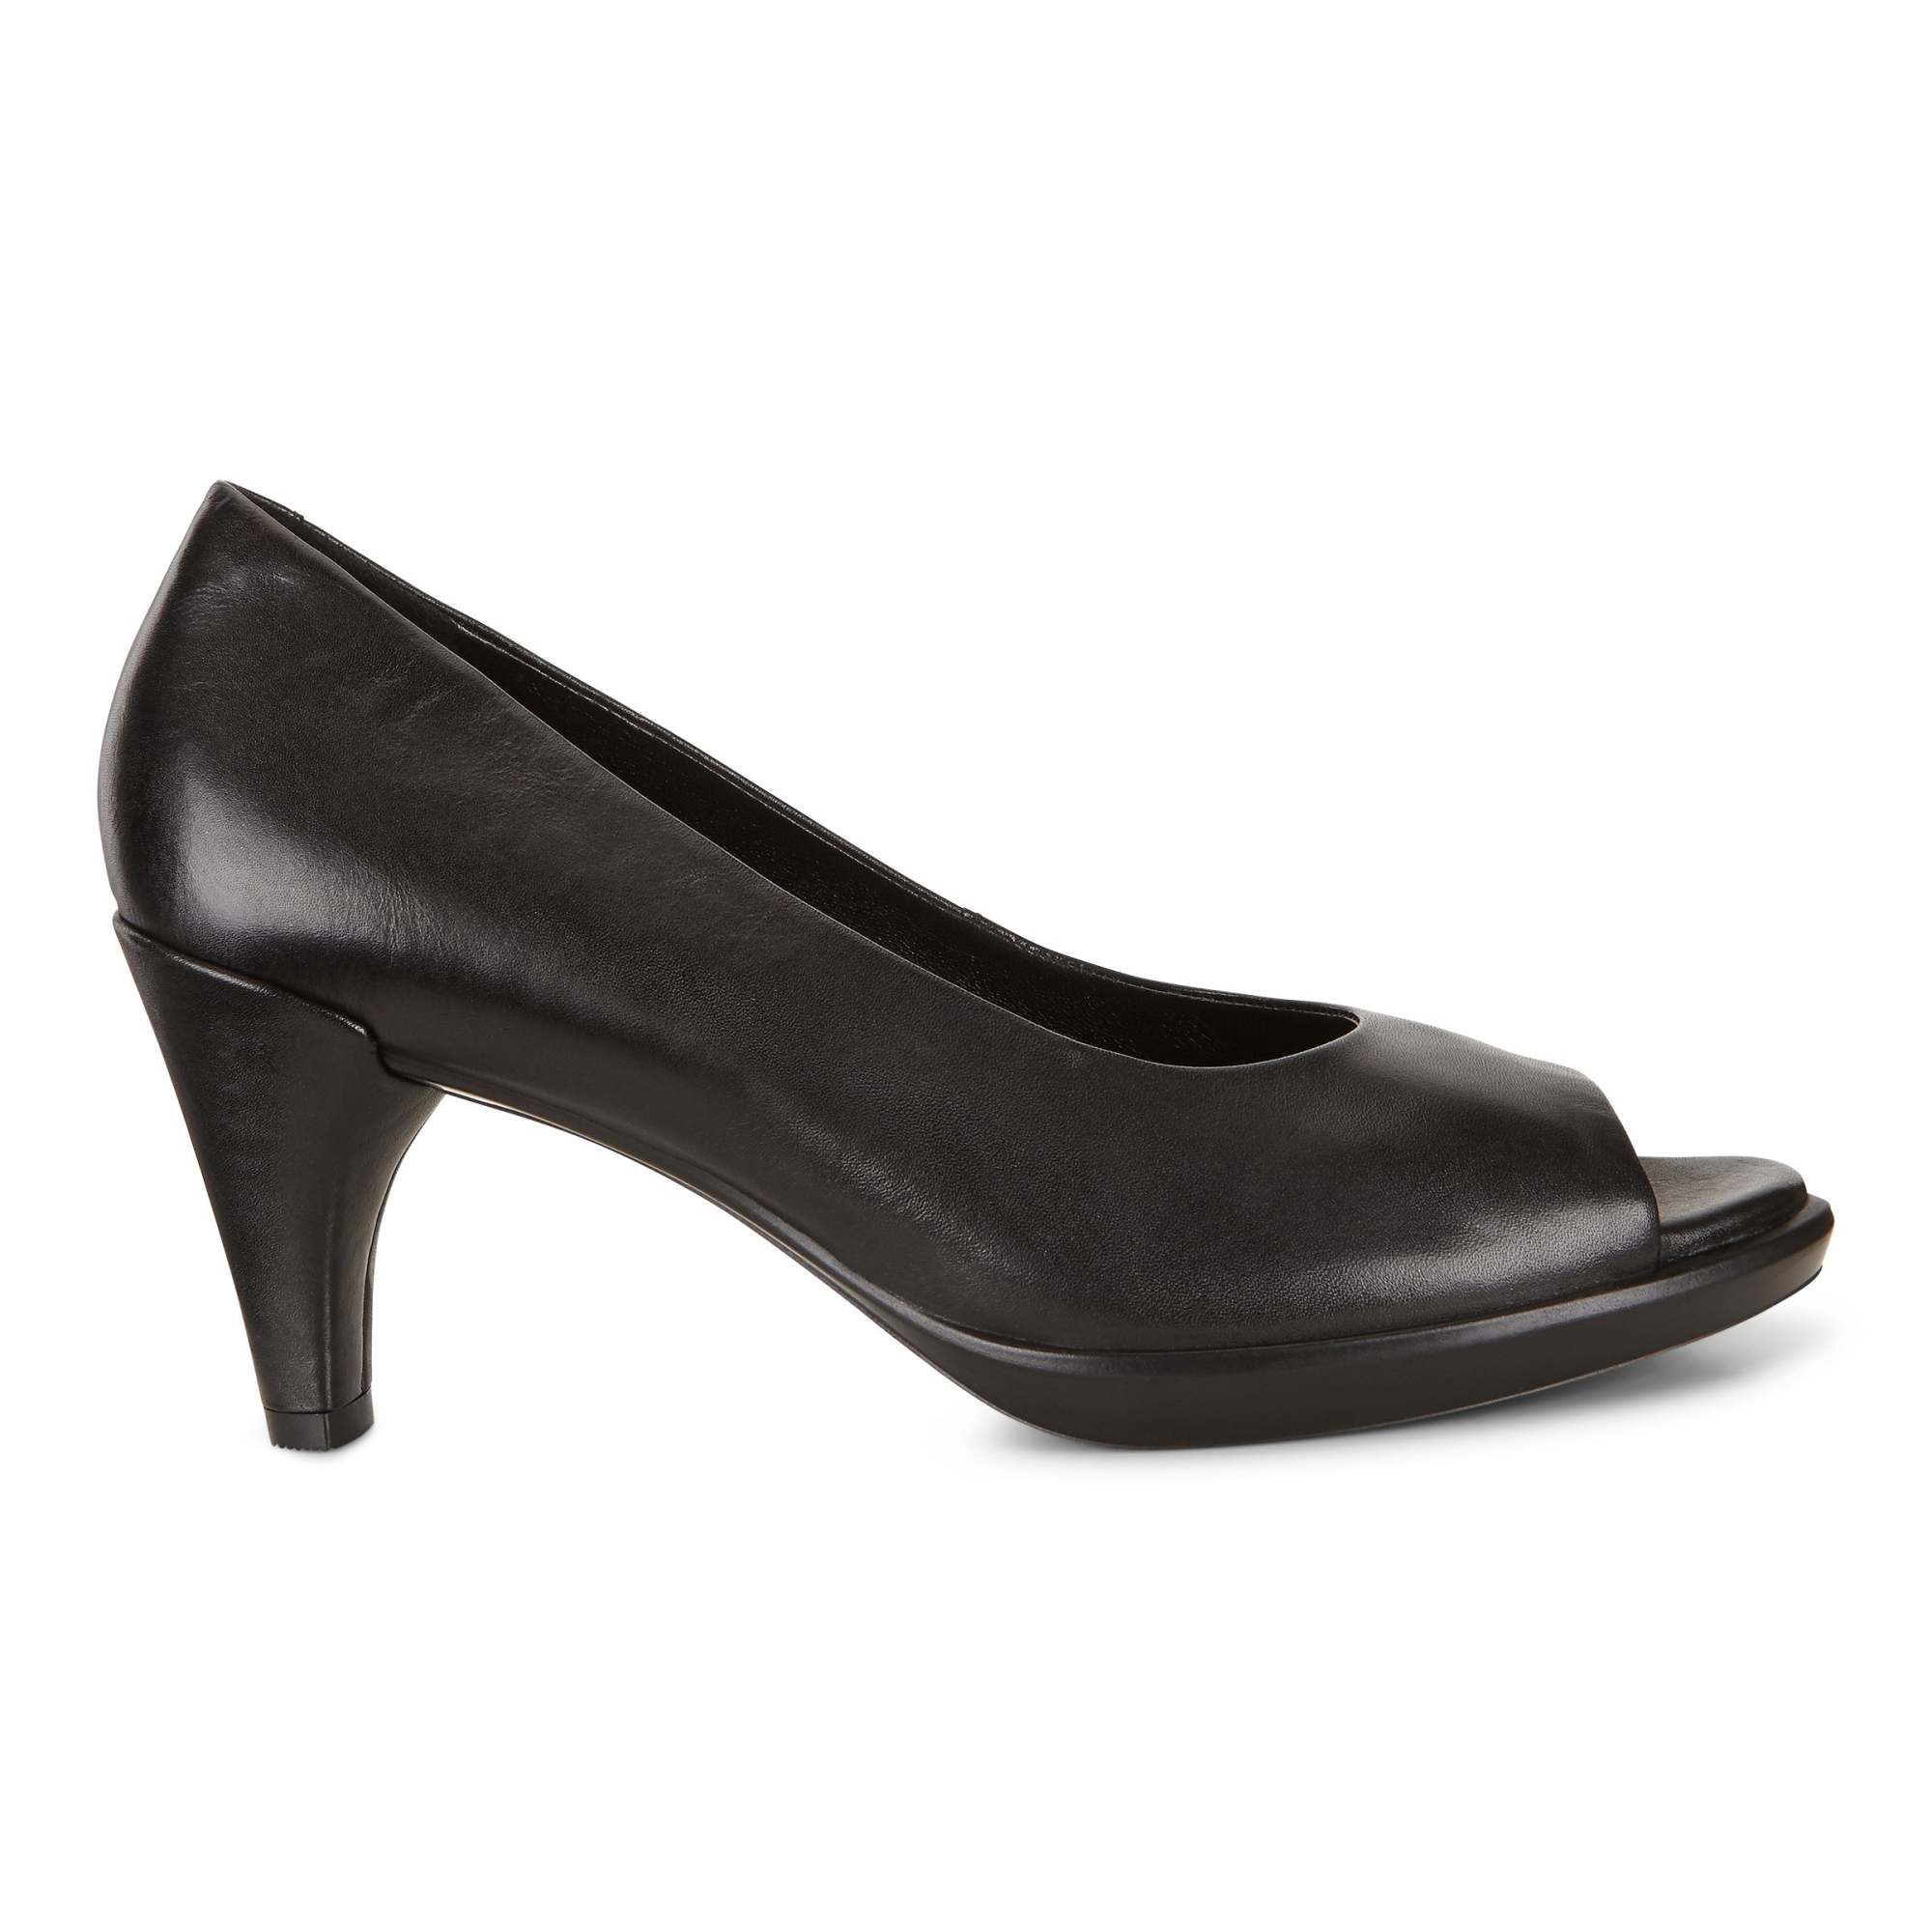 Ecco Shape 55 Peep Toe Sleek 41 - Products - Veryk Mall Veryk Mall, product, quick response, safe your money!